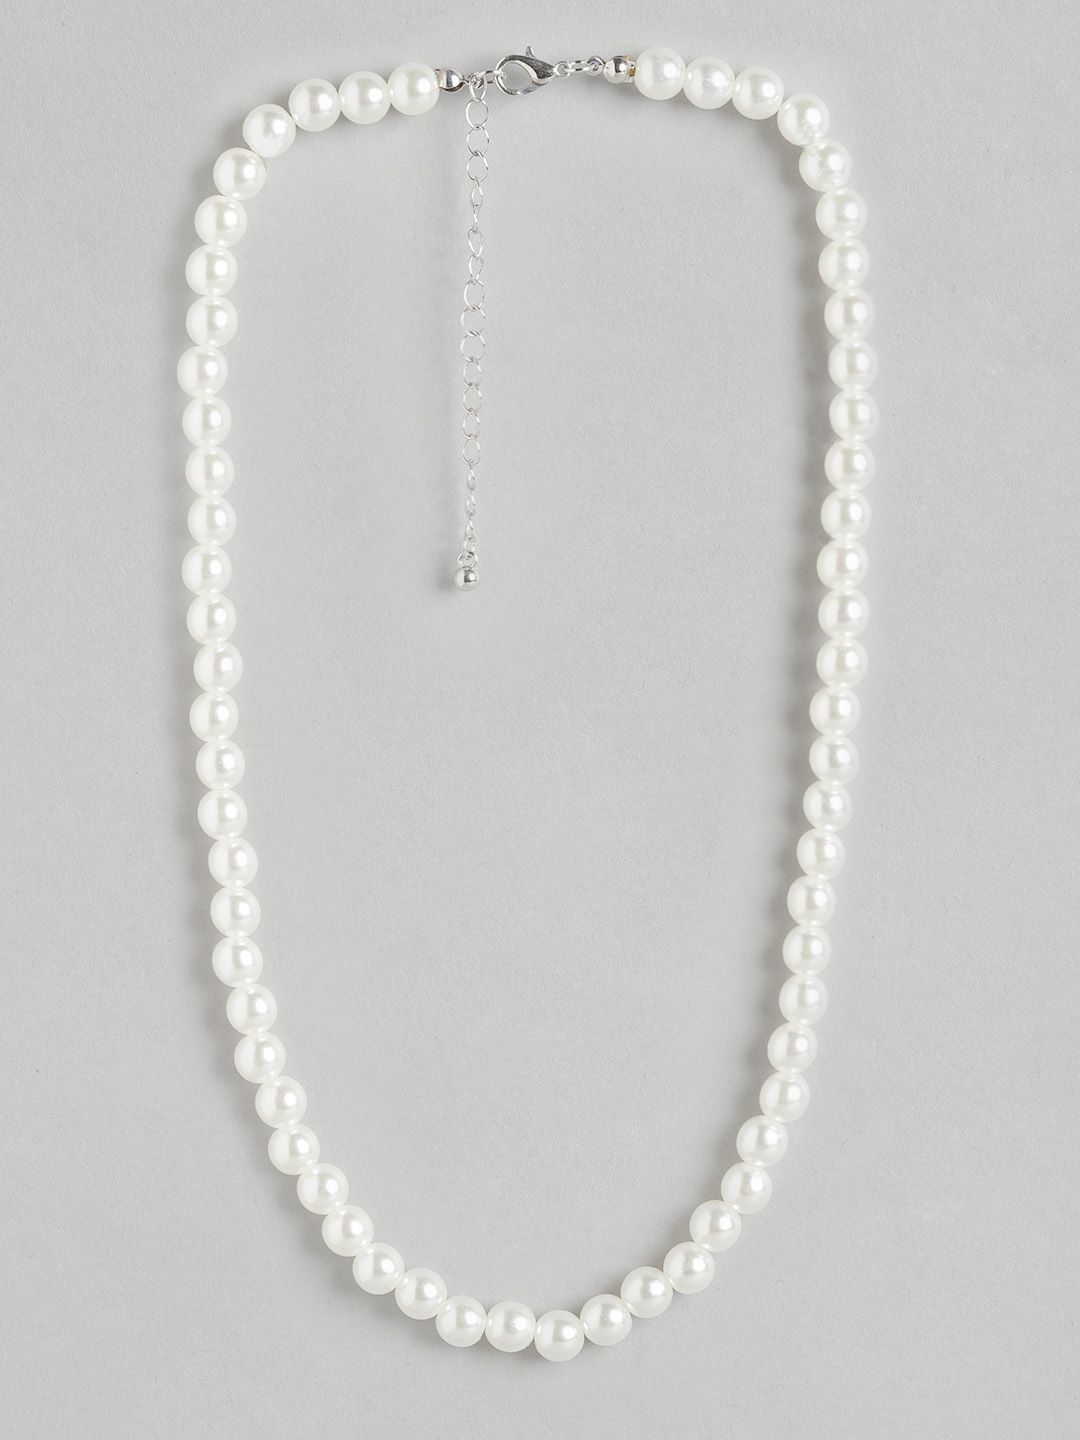 Carlton London White & Silver-Toned Rhodium-Plated Necklace Price in India